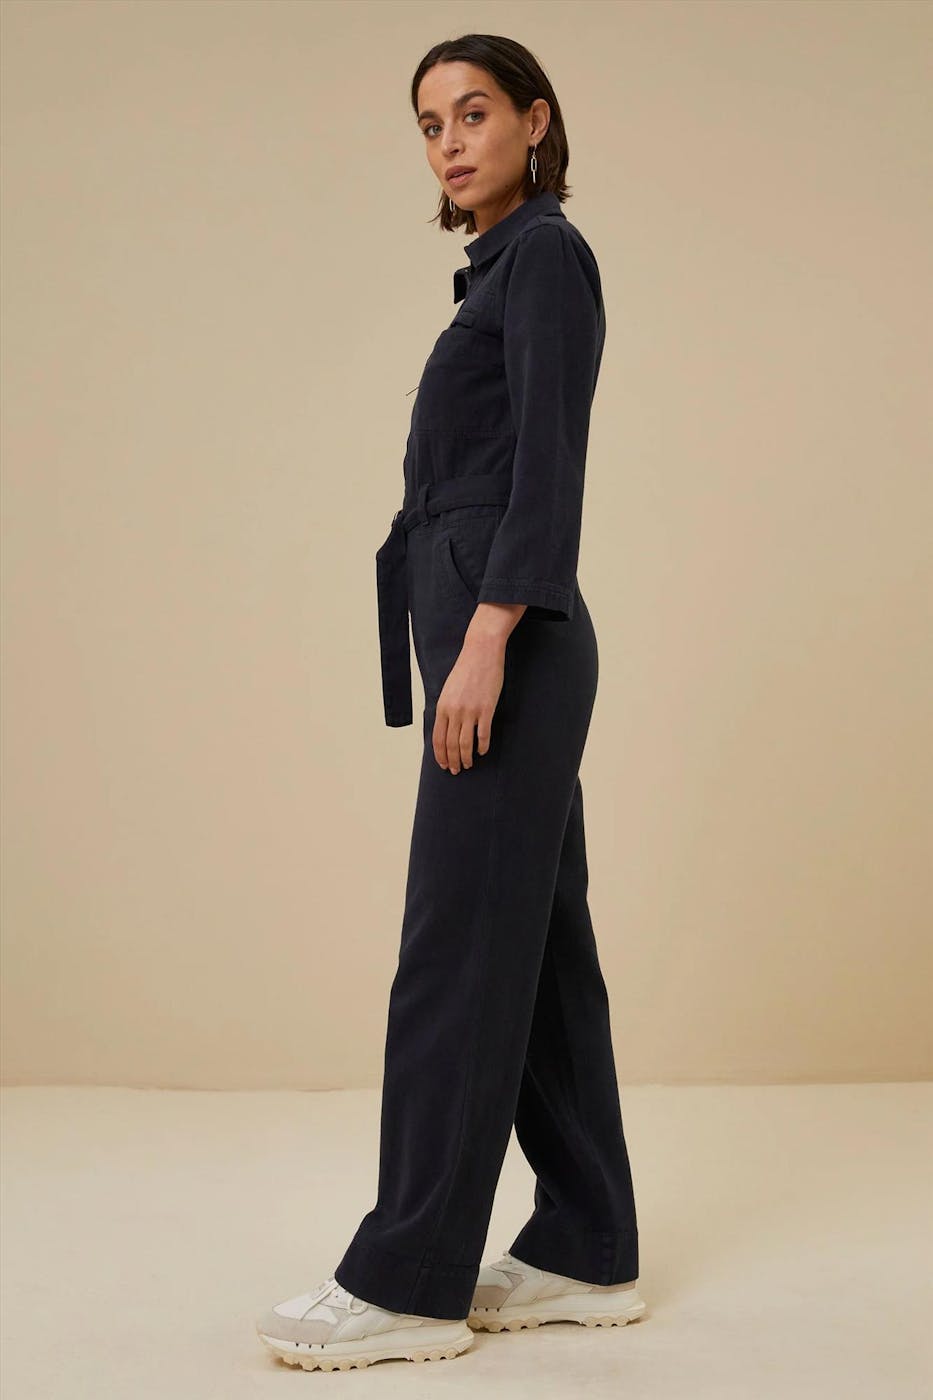 BY BAR - Donkergrijze Louise Twill jumpsuit